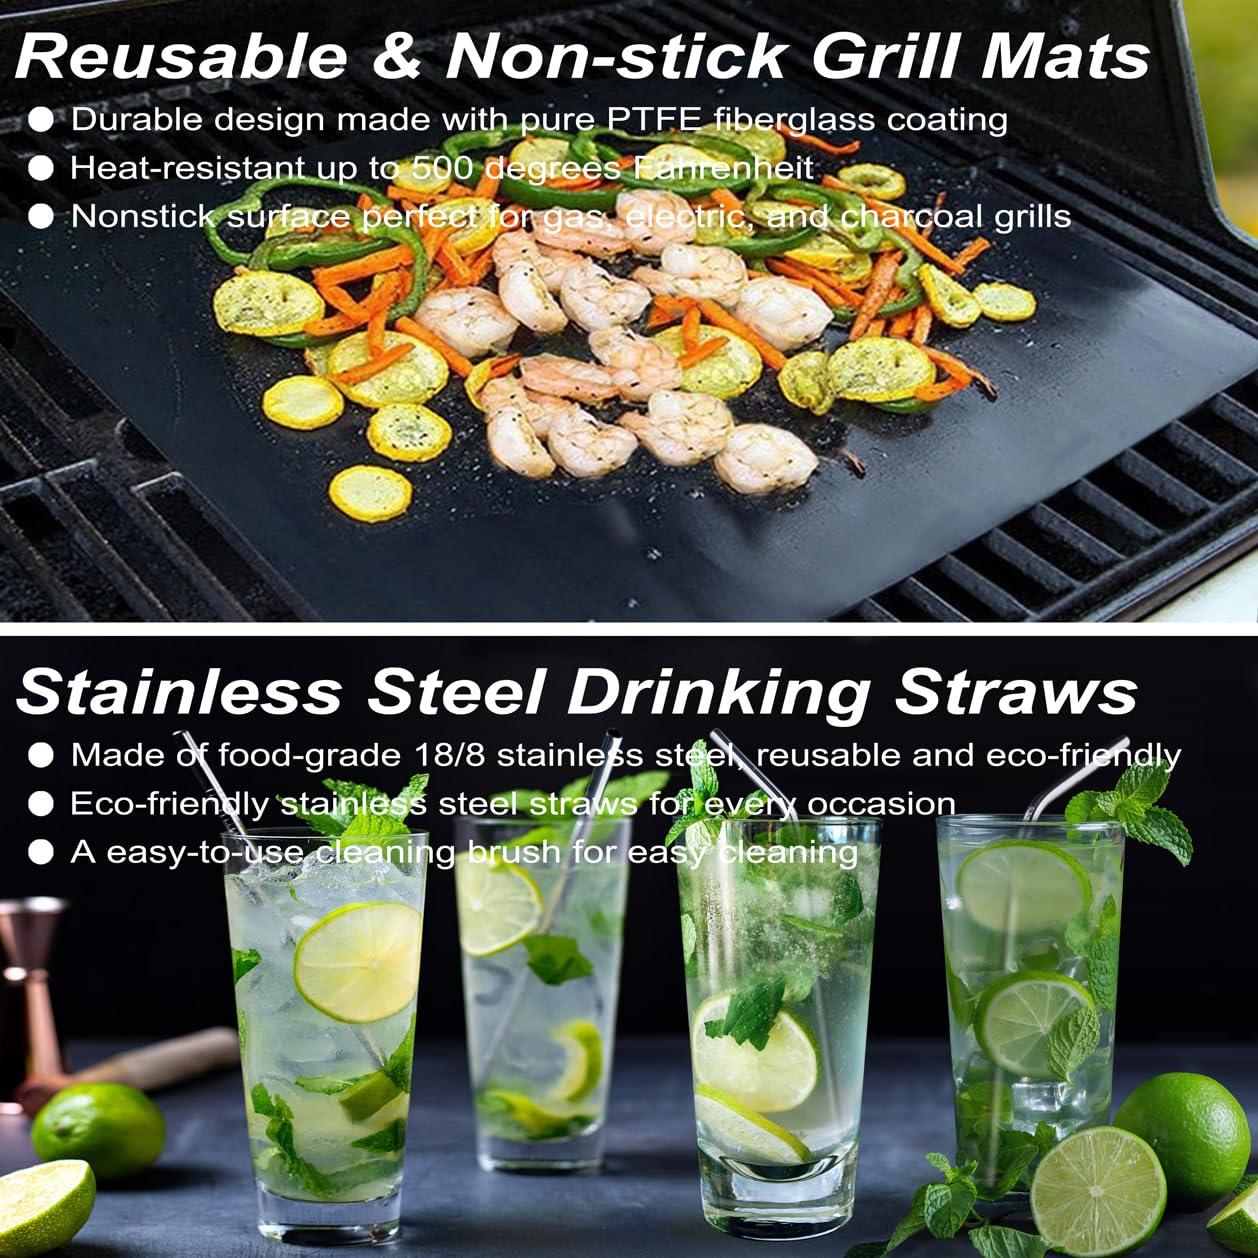 POLIGO 26PCS Heavy Duty BBQ Grill Accessories Set, Non-Slip Grill Tools for Outdoor Grill Set Thicker Stainless Steel Grill Utensils Set, Durable Grilling Tools Set Christmas Birthday Gifts for Men - CookCave